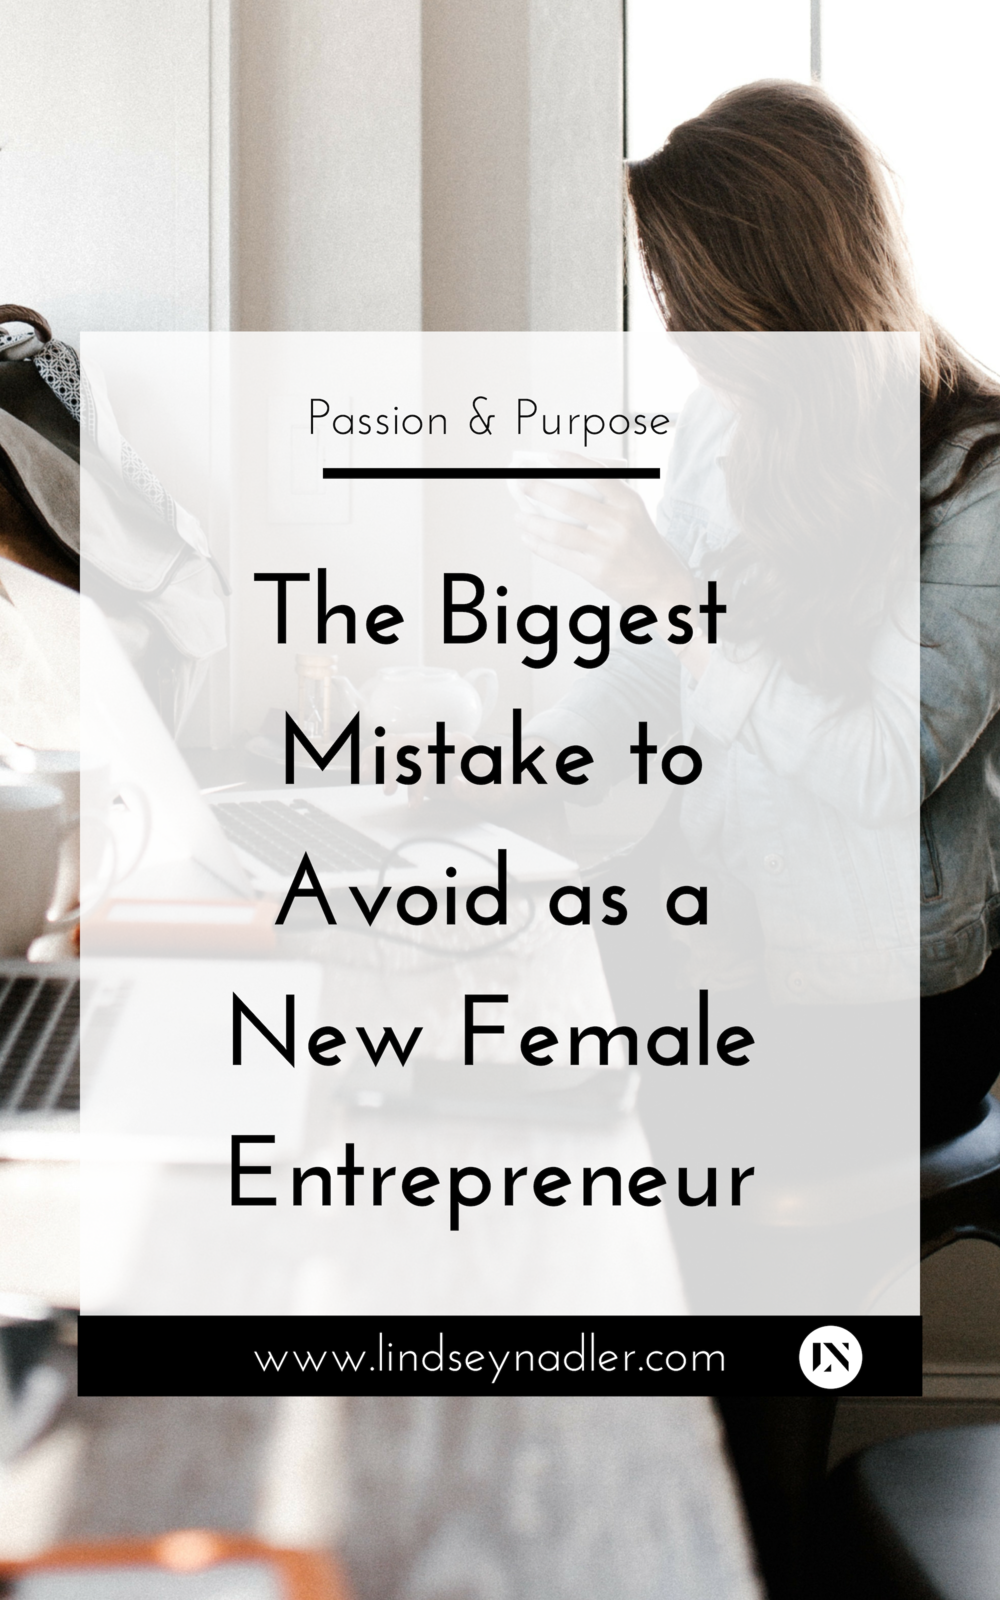 The Biggest Mistake to Avoid as a New Female Entrepreneur